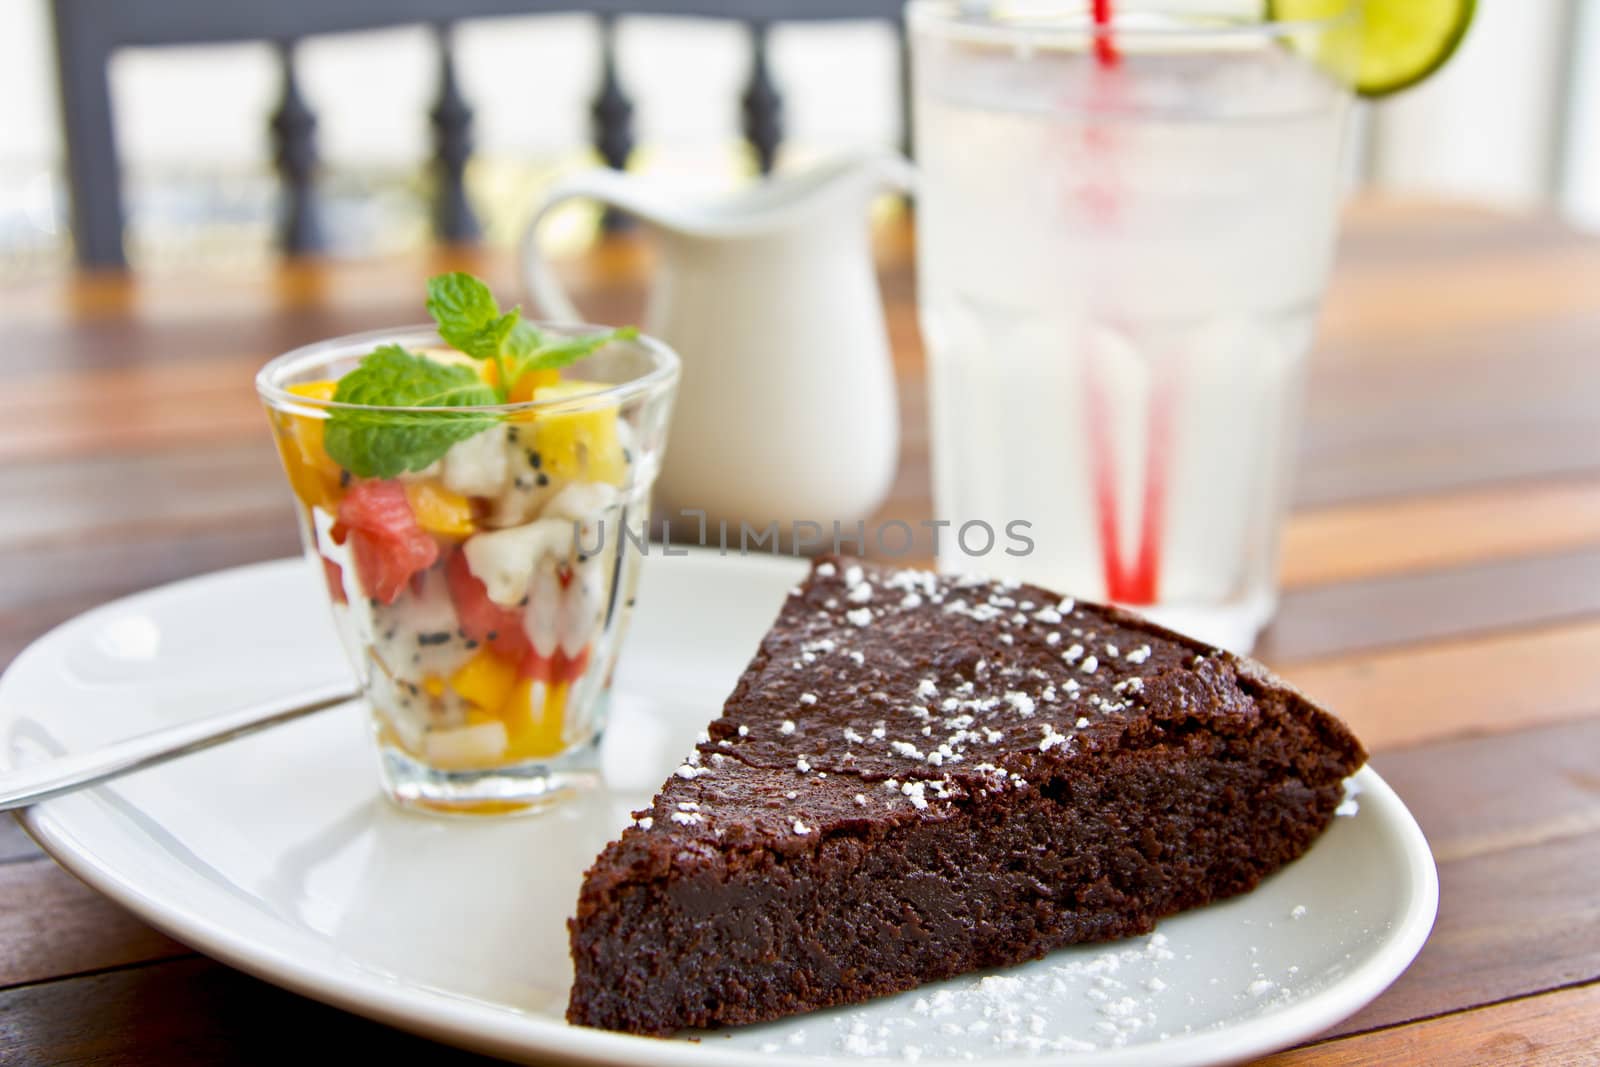 Chocolate fondant with fruit salad and lime juice